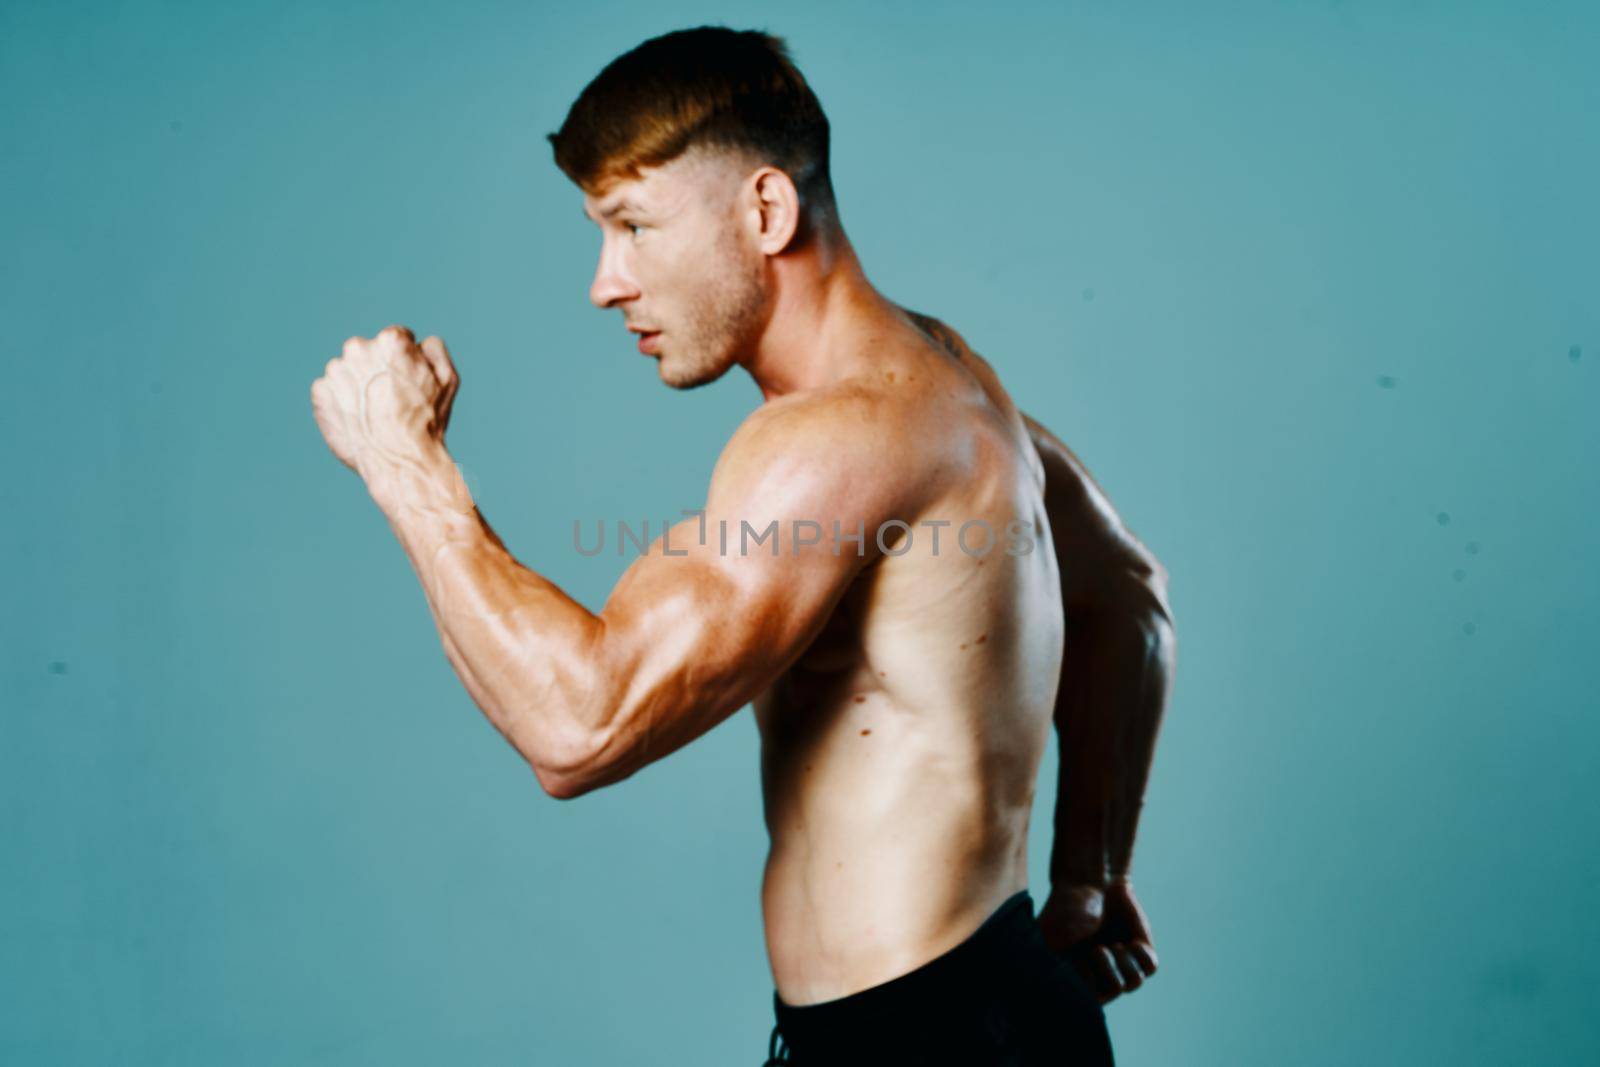 male athlete workout fitness muscle posing exercise. High quality photo